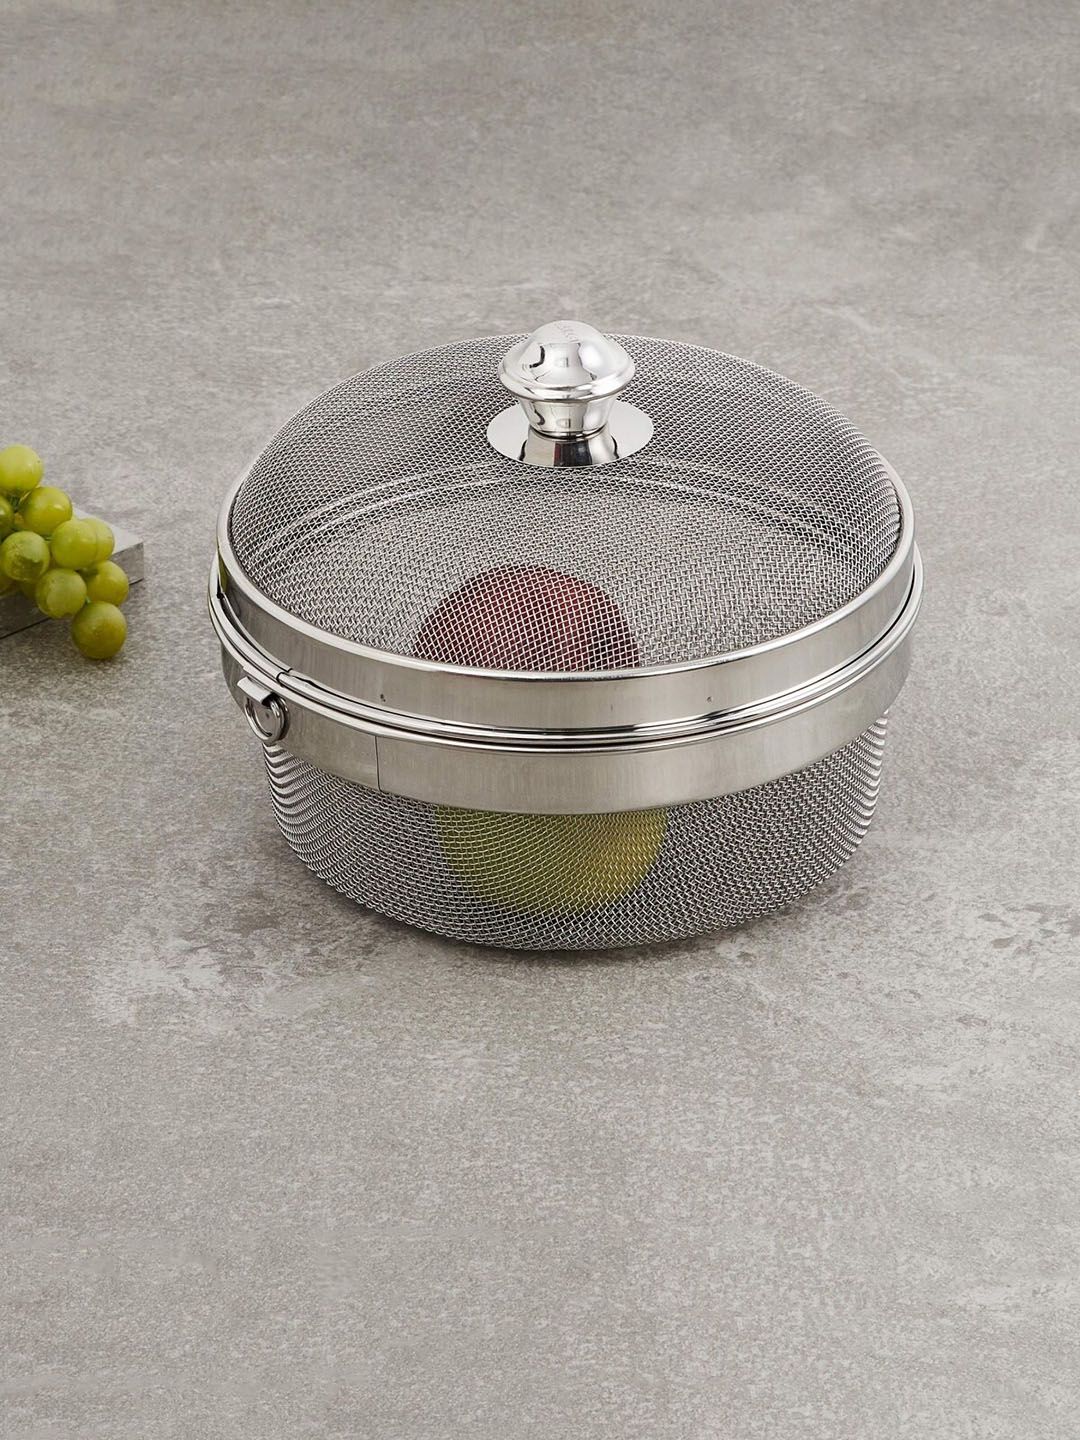 Home Centre Silver-Toned Solid Stainless Steel Multi-Utility Basket Price in India